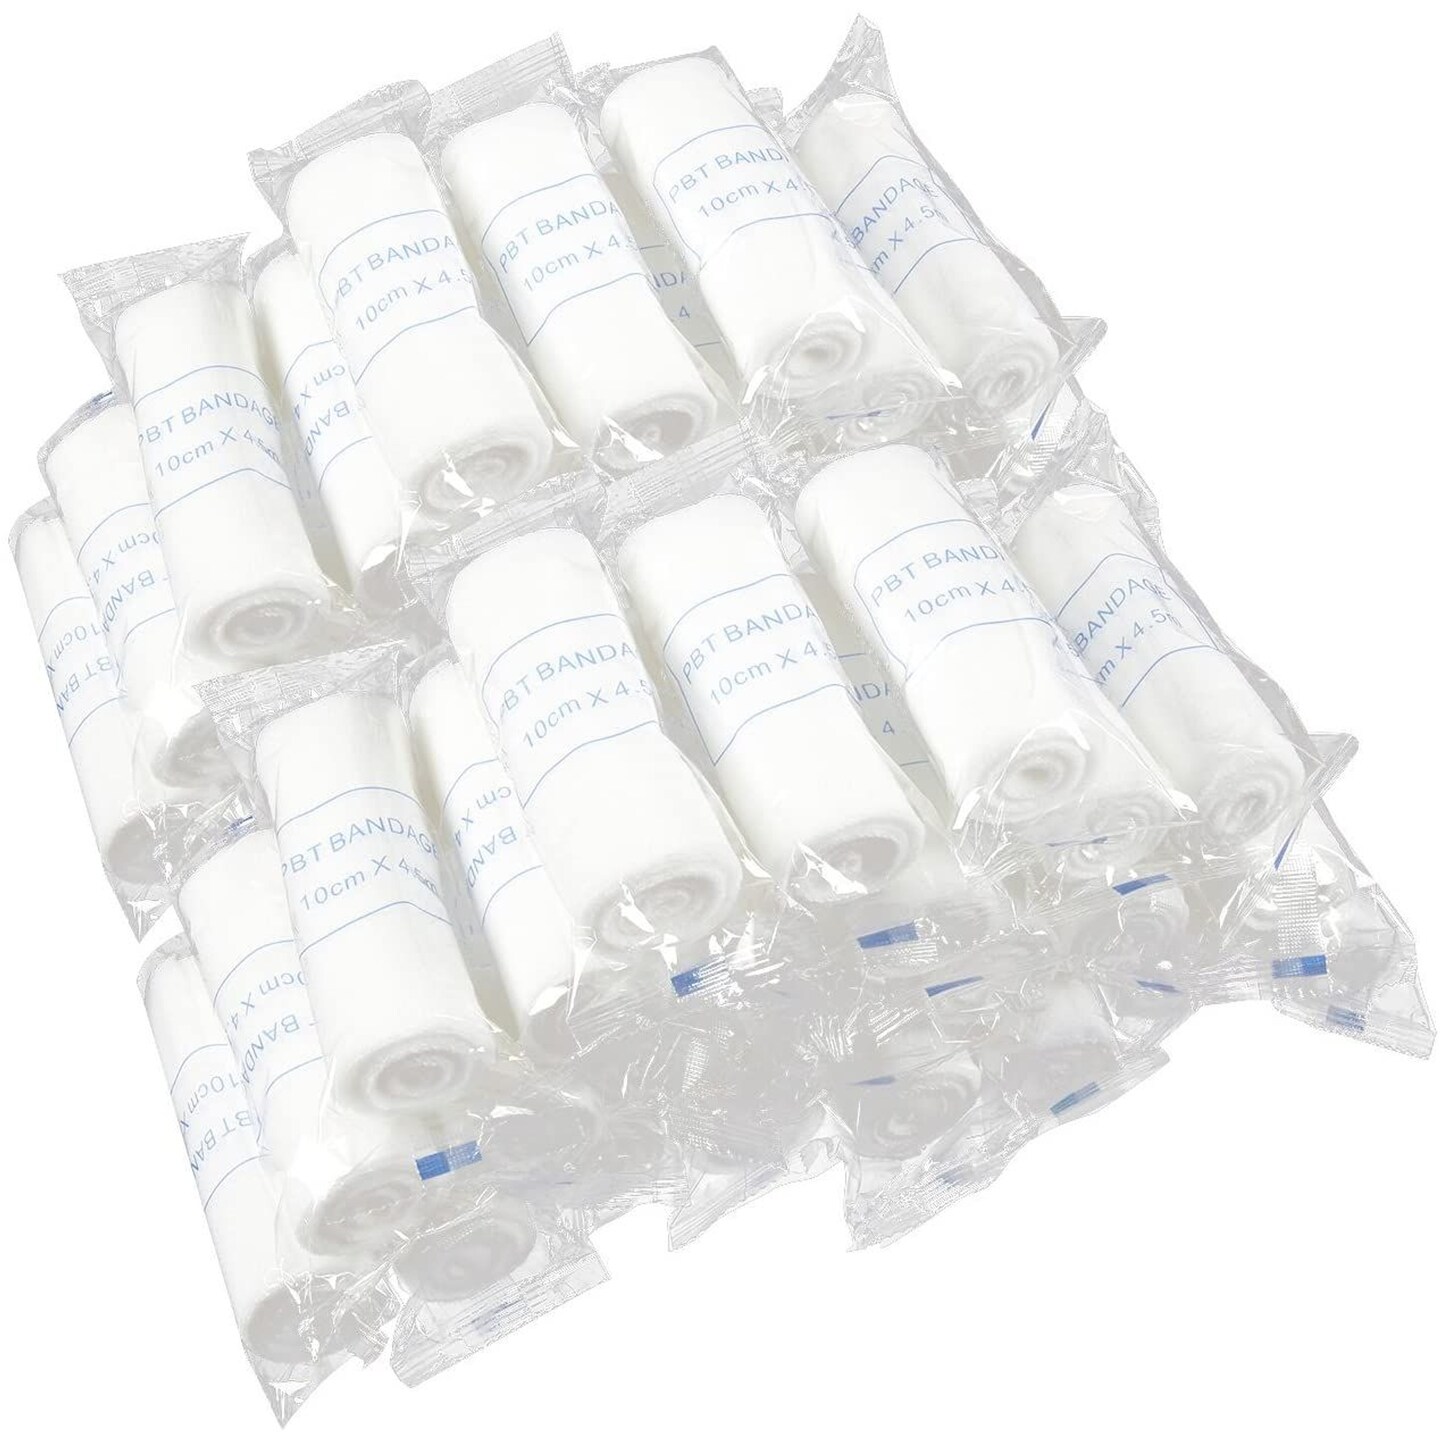 Gauze Bandage Rolls, Stretch Wraps for First Aid Wound Care (4 in x 8 Ft, 48-Pk)